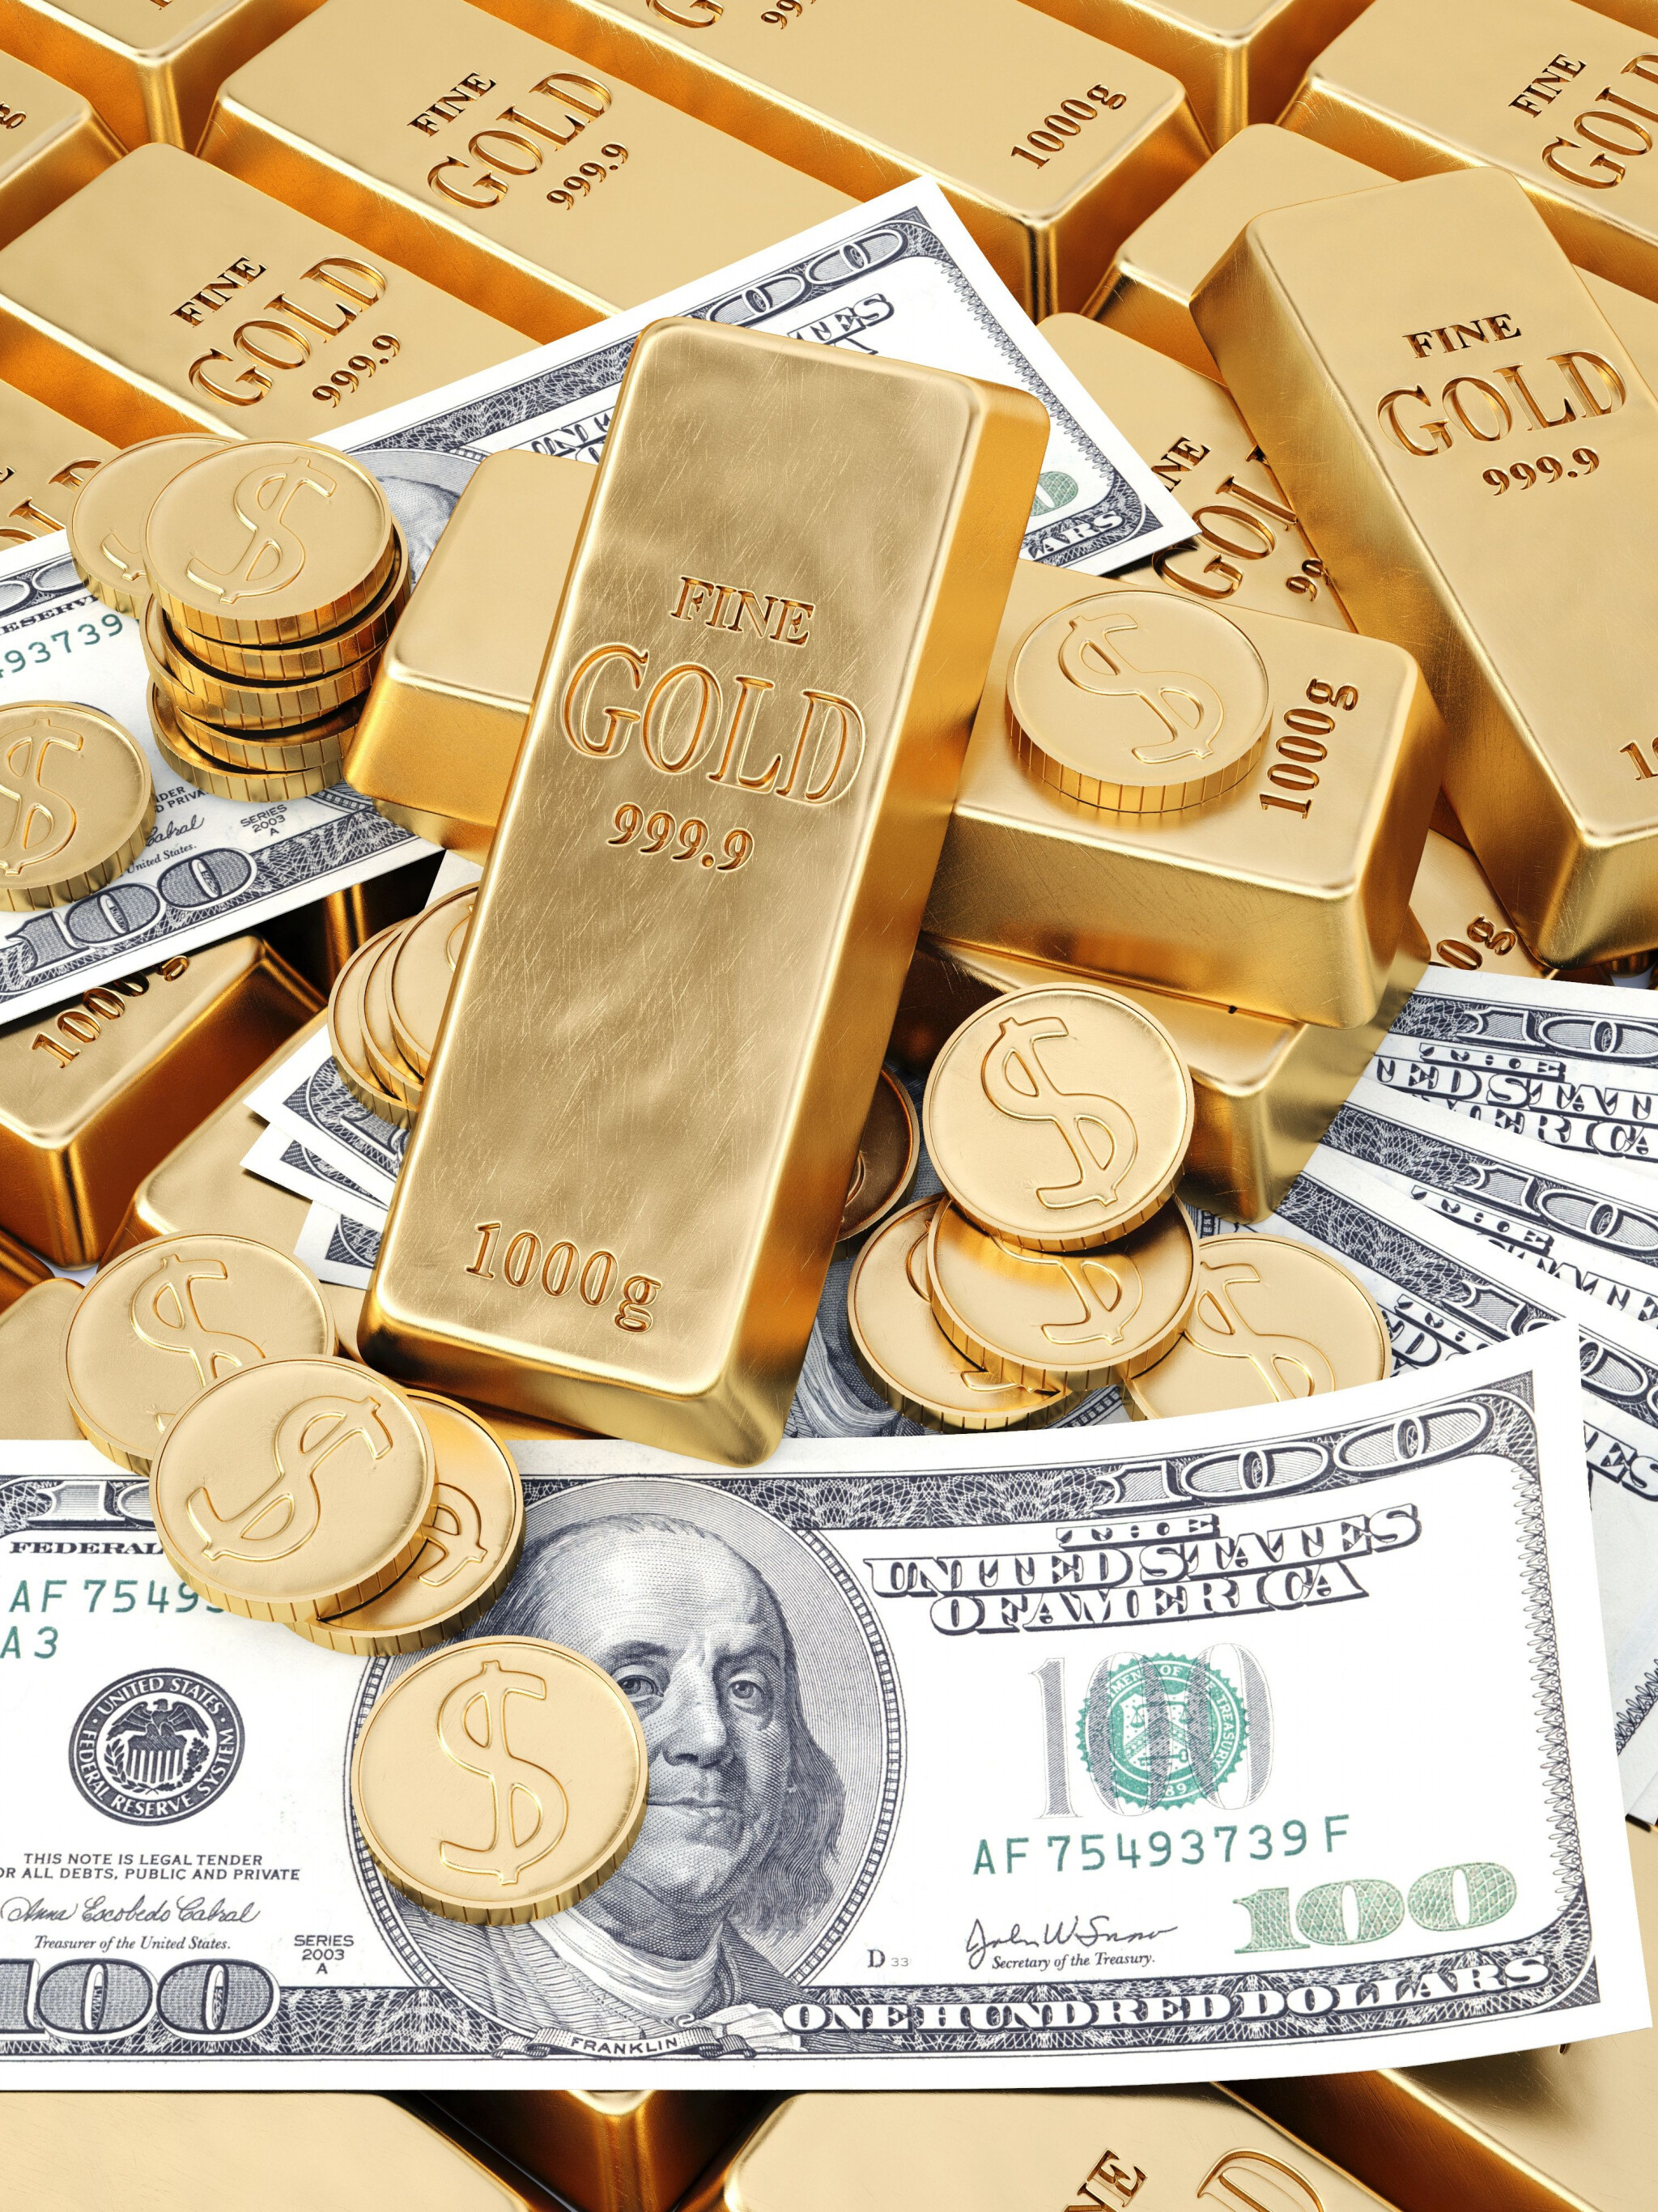 Gold Coins: United States one-hundred-dollar bill, 1 kg gold bullion bar, Currency, Paper money. 2050x2740 HD Wallpaper.